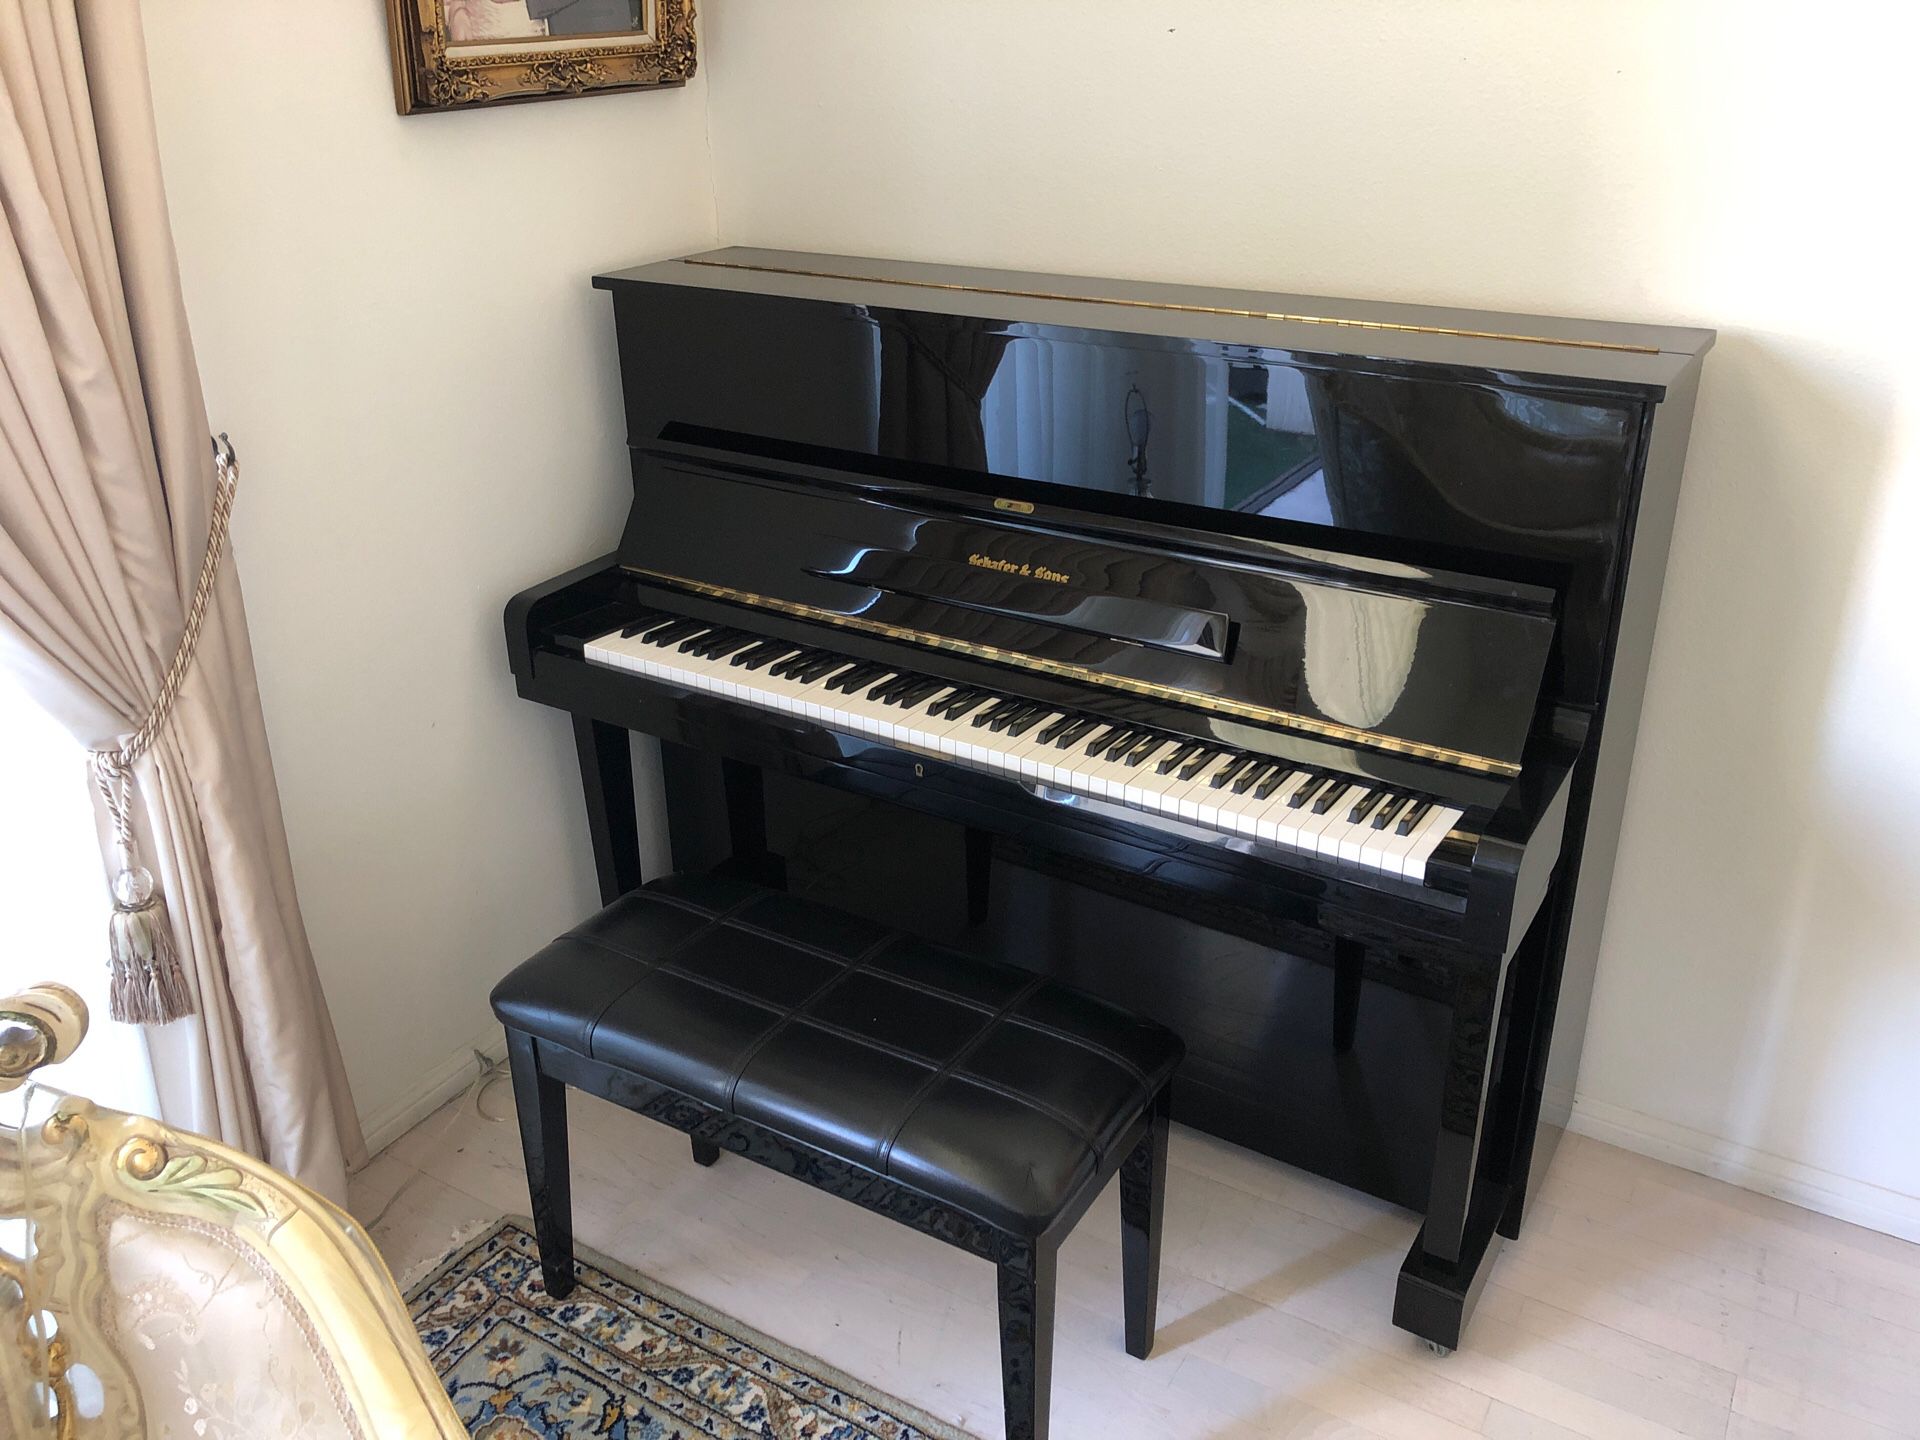 MINT Schafer & Sons VS-48 Piano (Black in excellent condition)